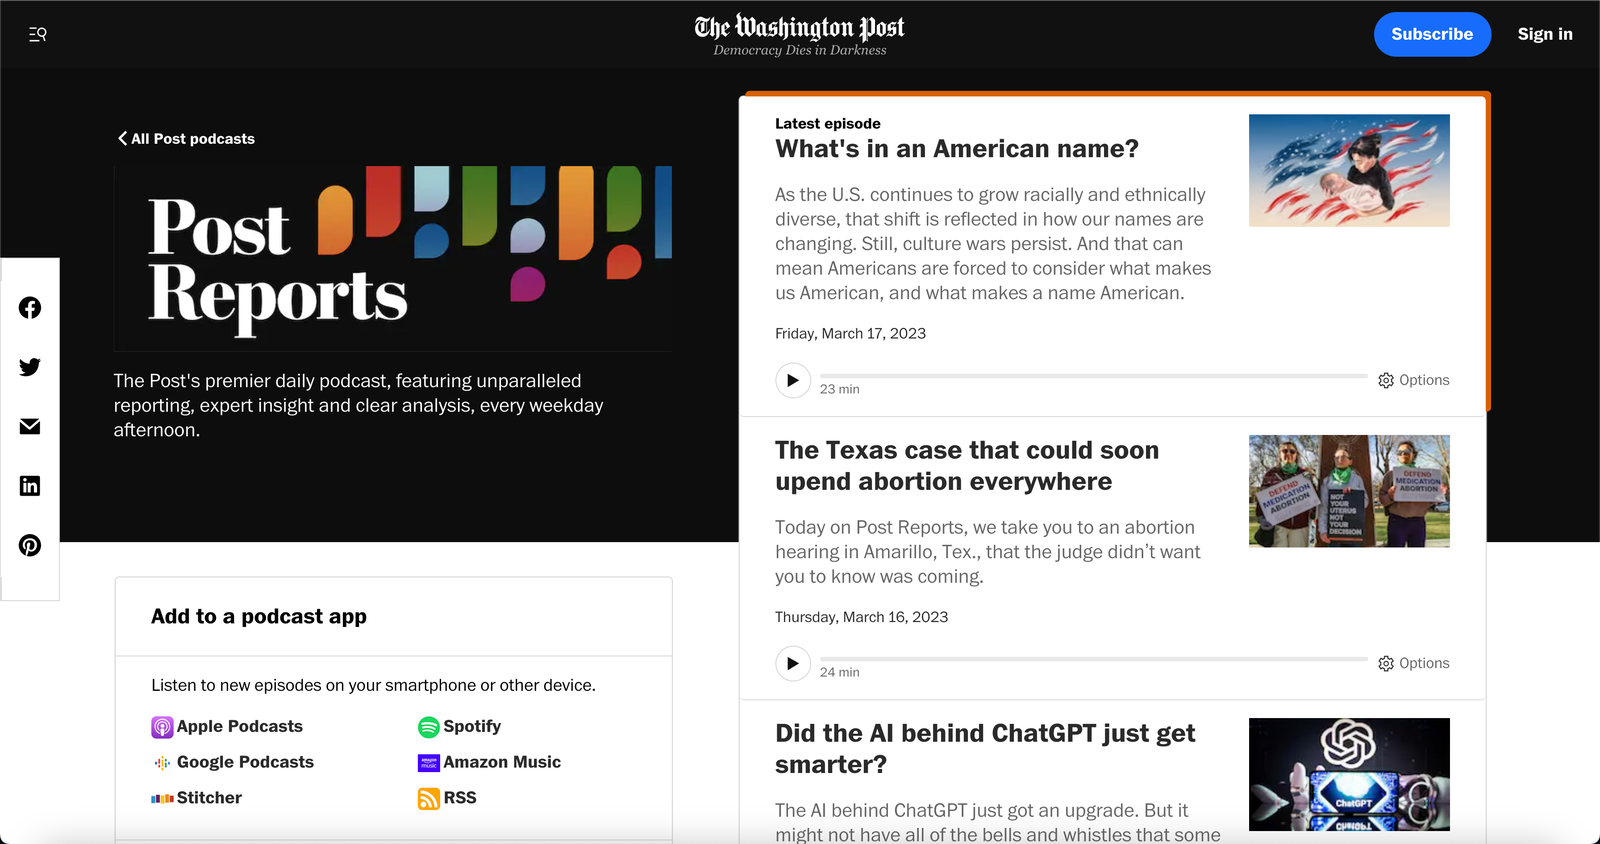 ​​Screenshot of the Washington Post website Post Reports podcasts section shows a list of podcast episodes on the right-hand side of the page. There are play buttons and options buttons visible for each episode, but there is not a transcripts button visible because the user has to click ‘Options’ to find it.